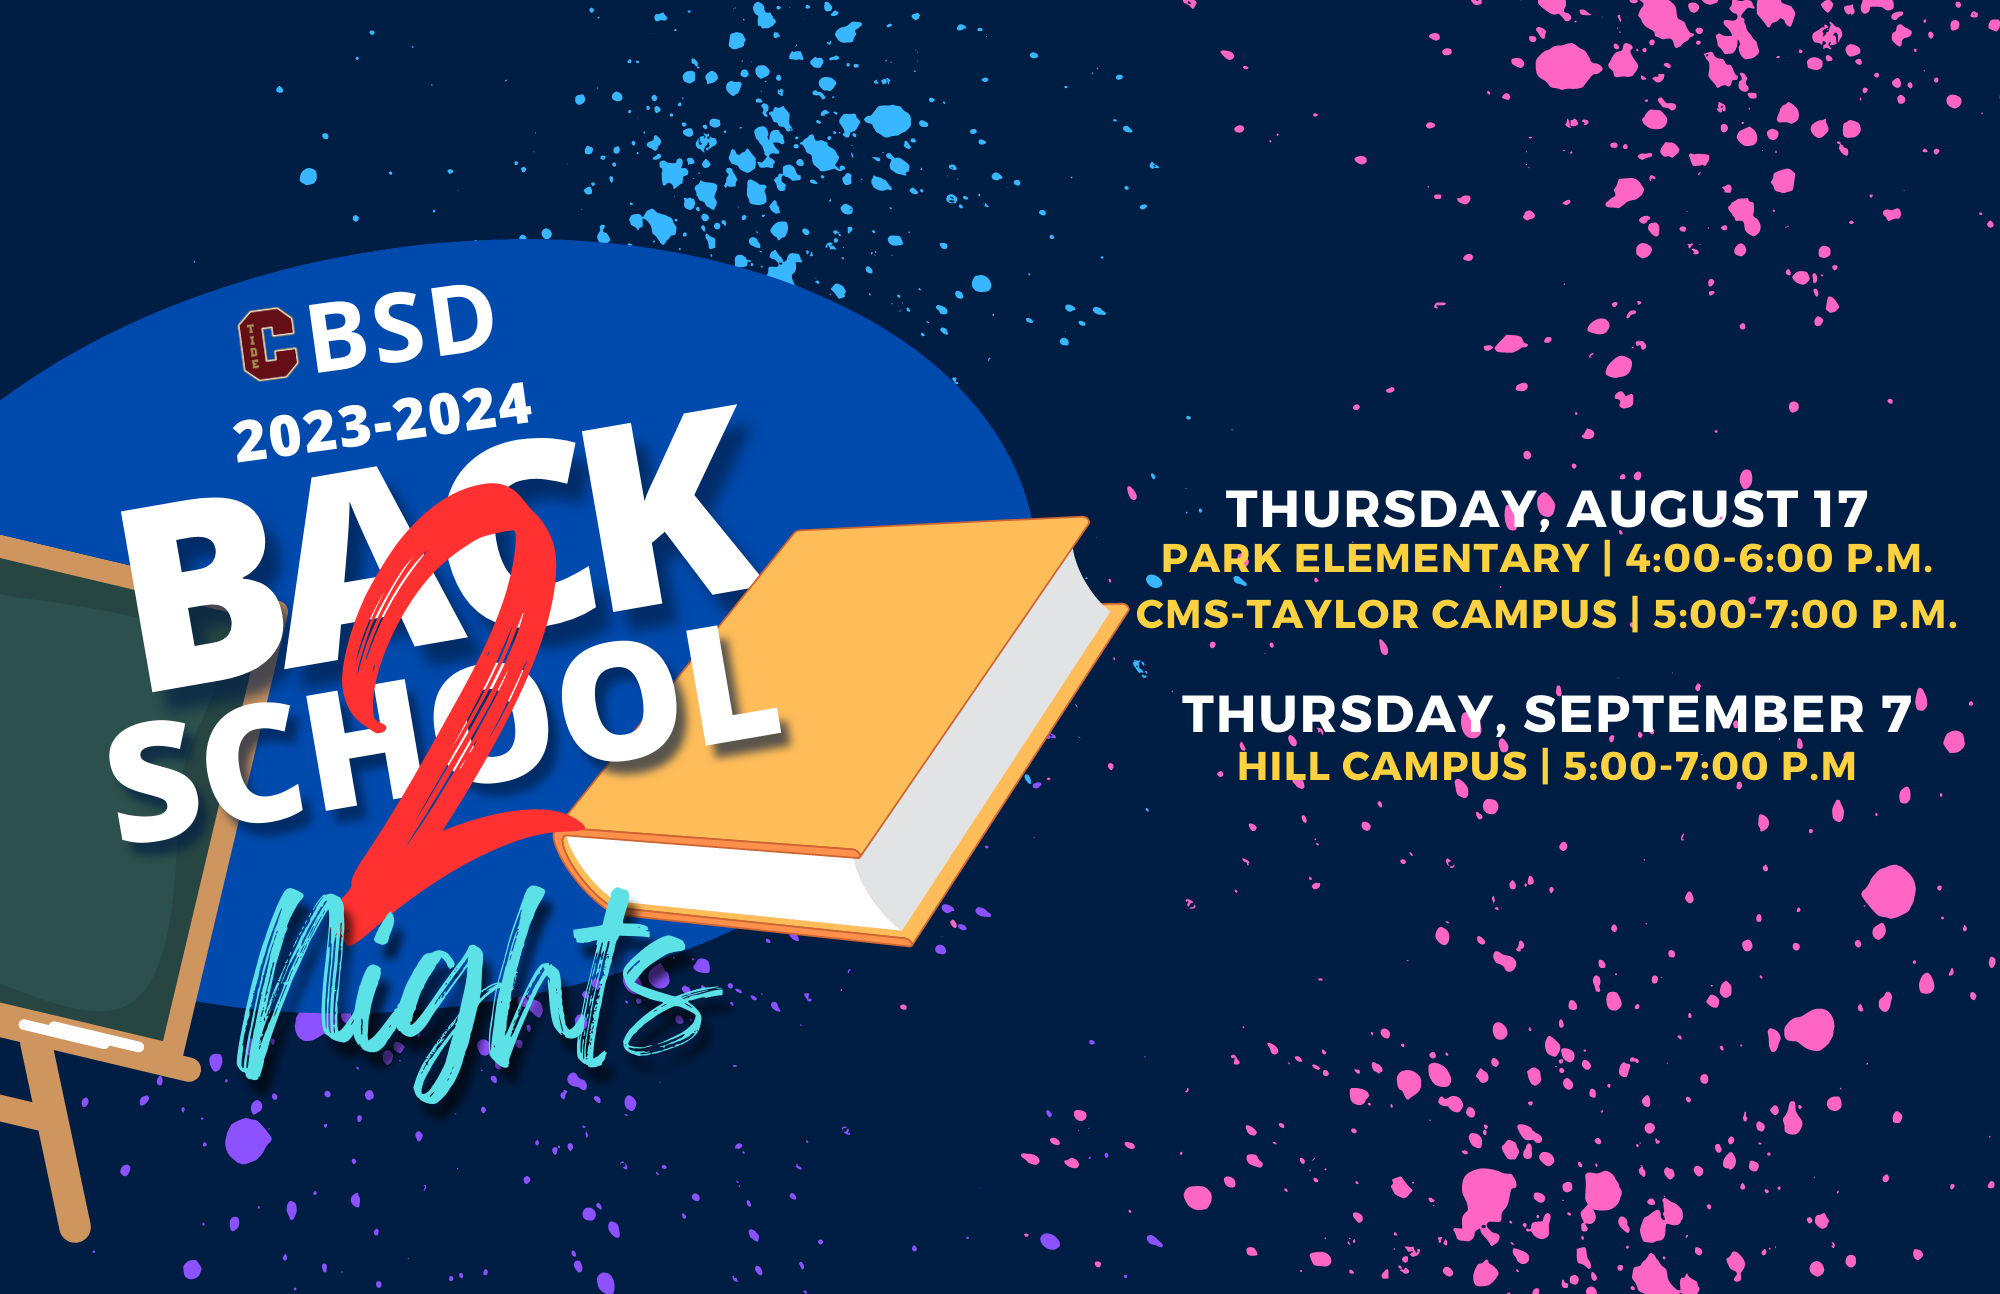 CBSD 2023-2024 Back to School Nights Thursday, august 17 Park Elementary | 4:00-6:00 p.m. CMs-Taylor Campus | 5:00-7:00 p.m Thursday,September 7 Hill Campus | 5:00-7:00 p.M